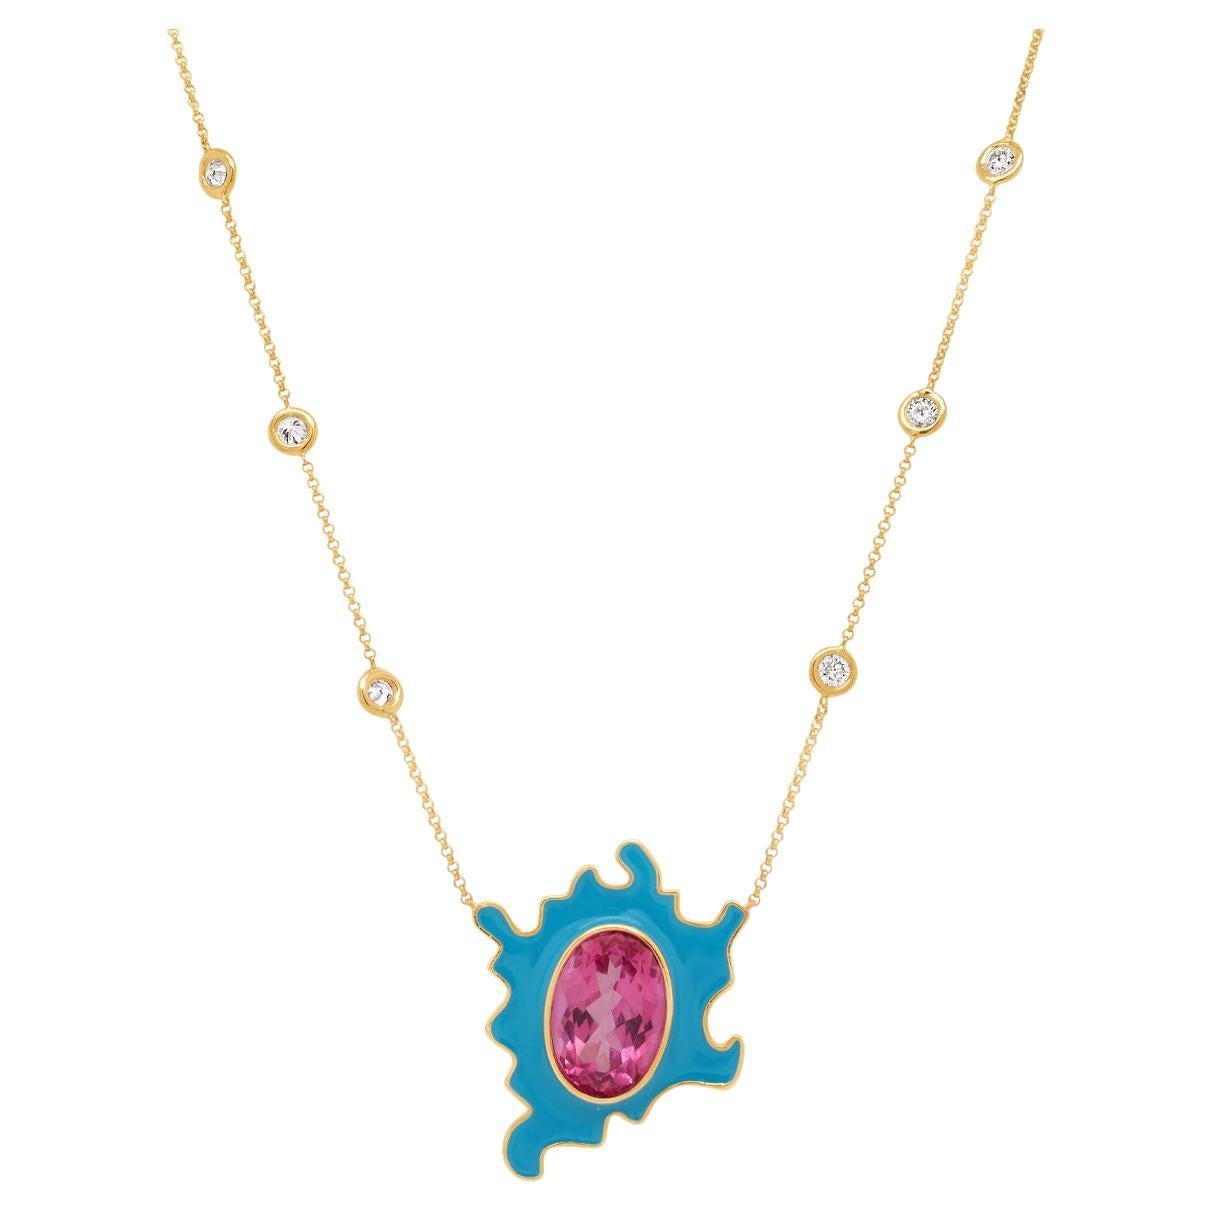 Psychedelic Solitaire Necklace 5.9gms 8.15ctw Tourmaline and Cobalt Enamel For Sale